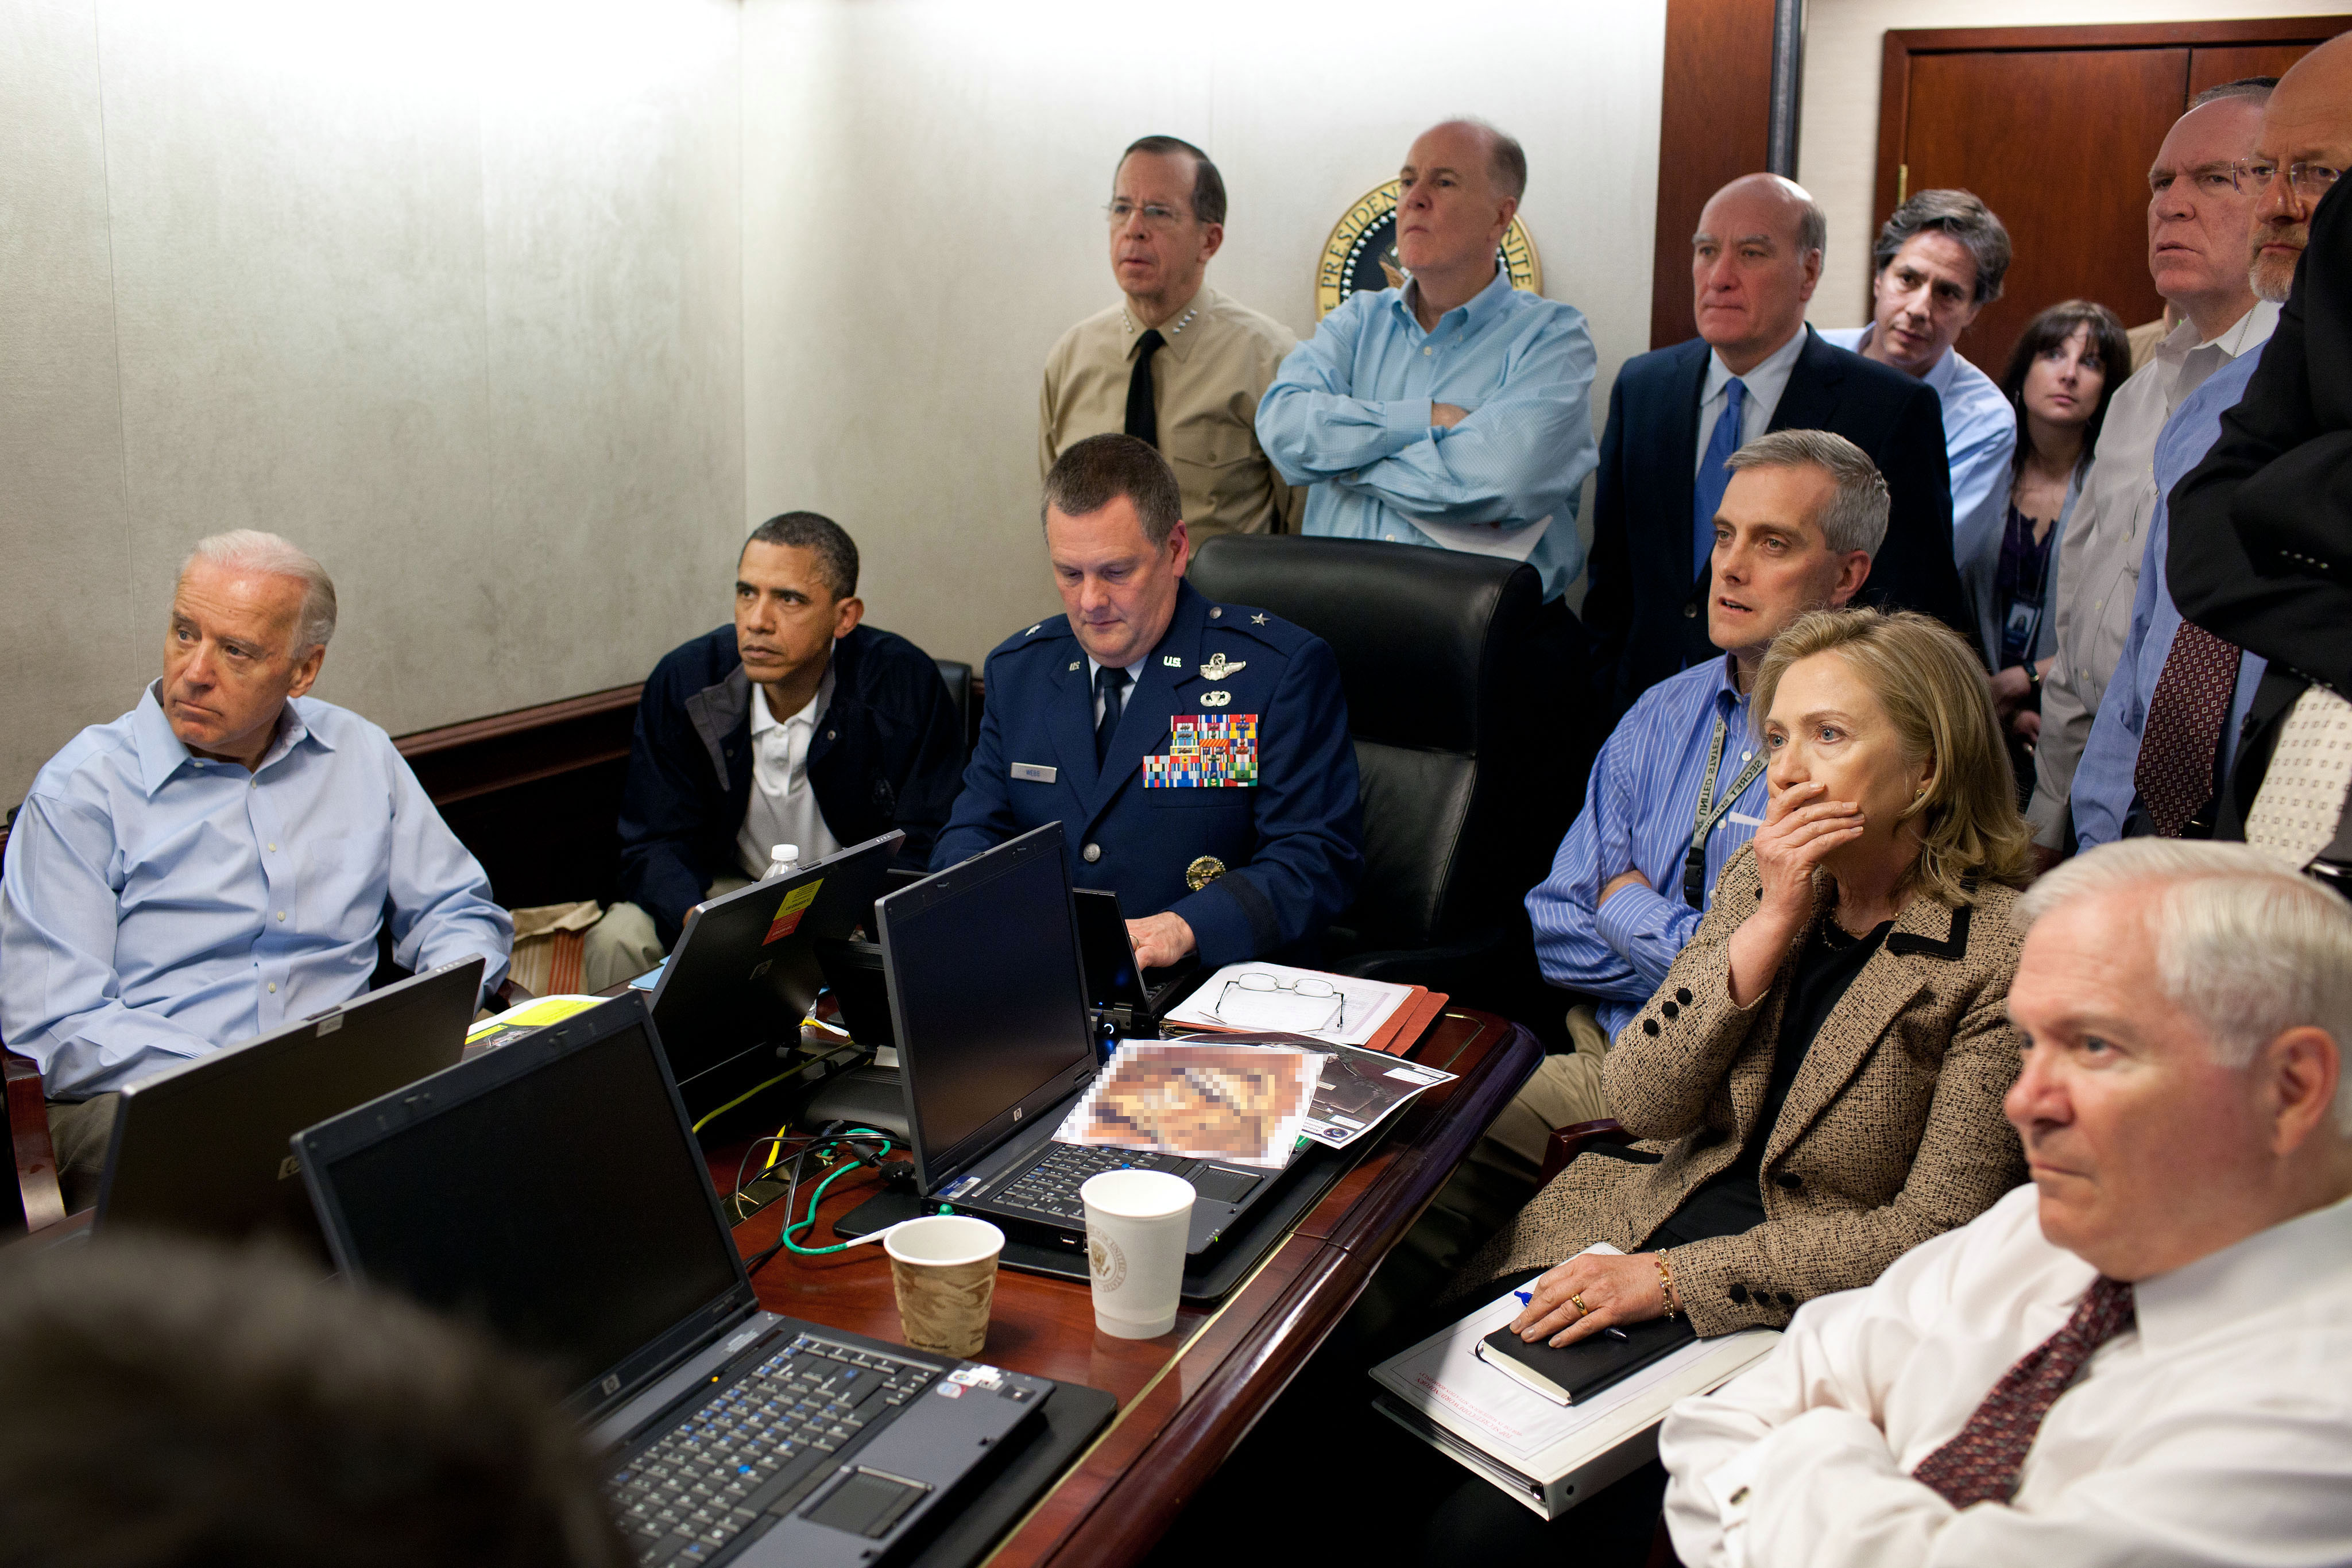 The Situation Room - Taken by Pete Souza on the afternoon of May 1, 2011, this image shows President Barack Obama and his national security team crowded into a small conference room in the West Wing’s Situation Room, receiving updates as US forces raided Osama bin Laden’s Pakistan compound and killed the terrorist leader. Photographs of bin Laden’s body have never been released, making Souza’s photo the only public image of one of the defining moments of the war on terror.